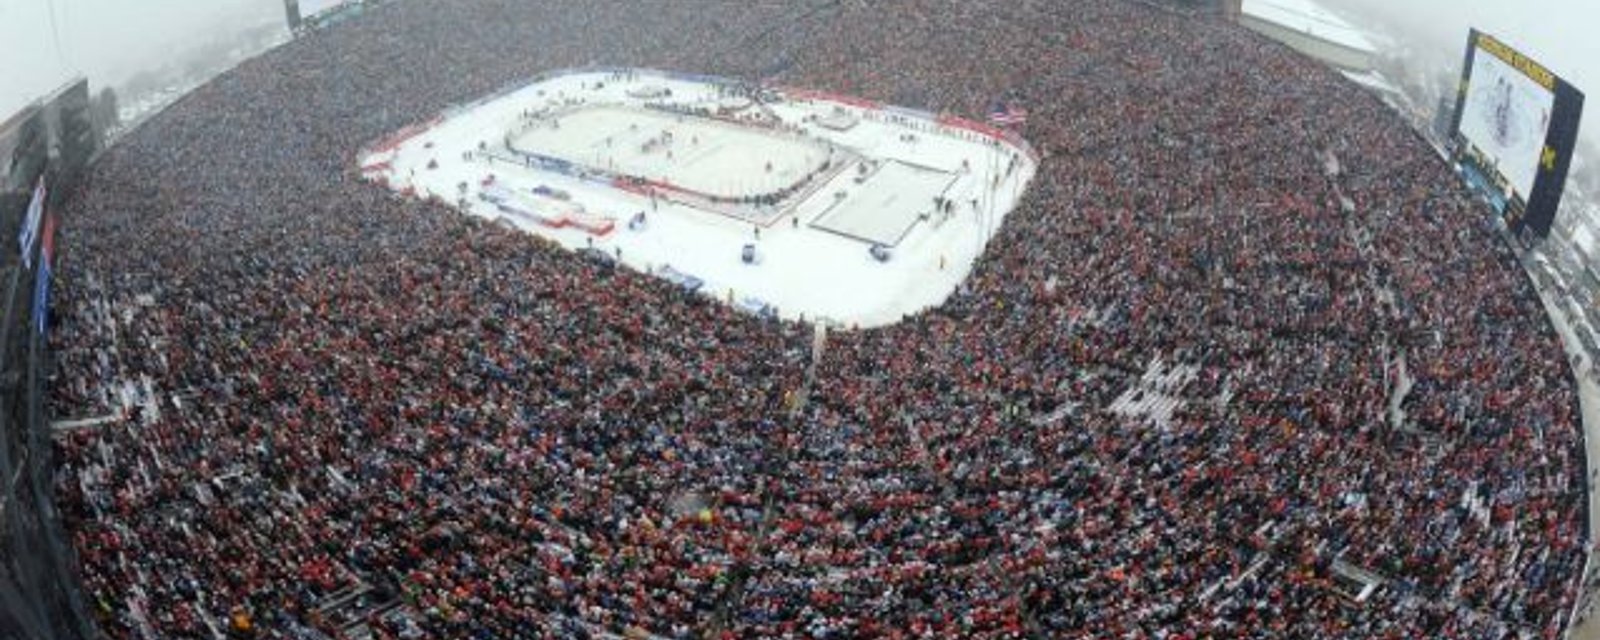 NHL reportedly considering the idea of 2021 season in outdoor games proposed by teams 